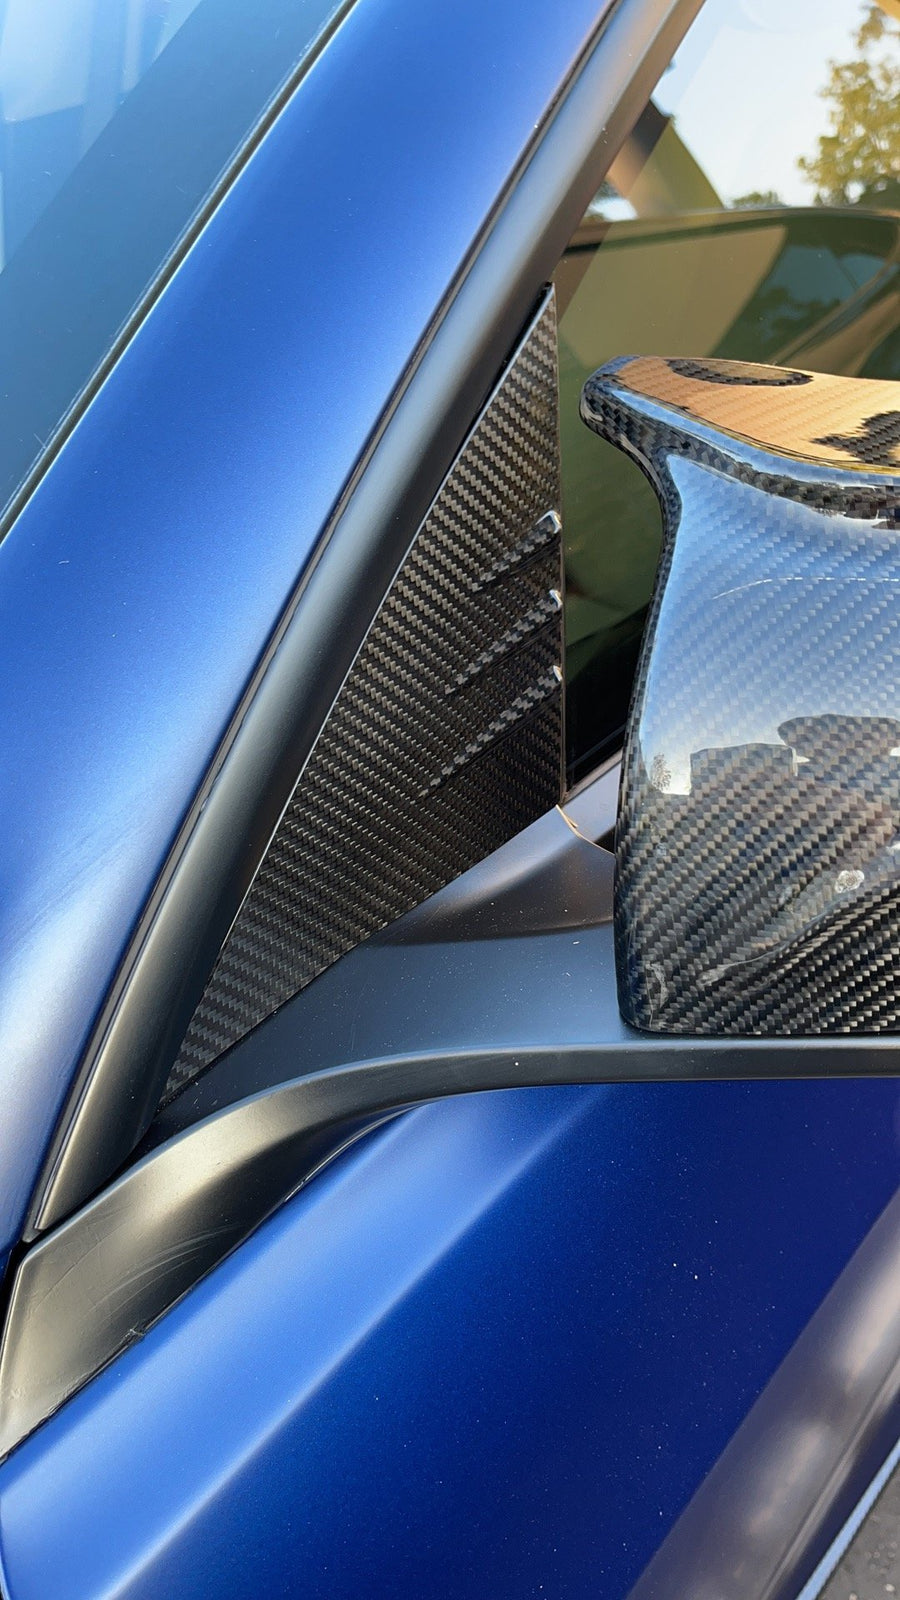 Model Y A-Pillar Accent Overlays (1 Pair) - Real Molded Carbon Fiber